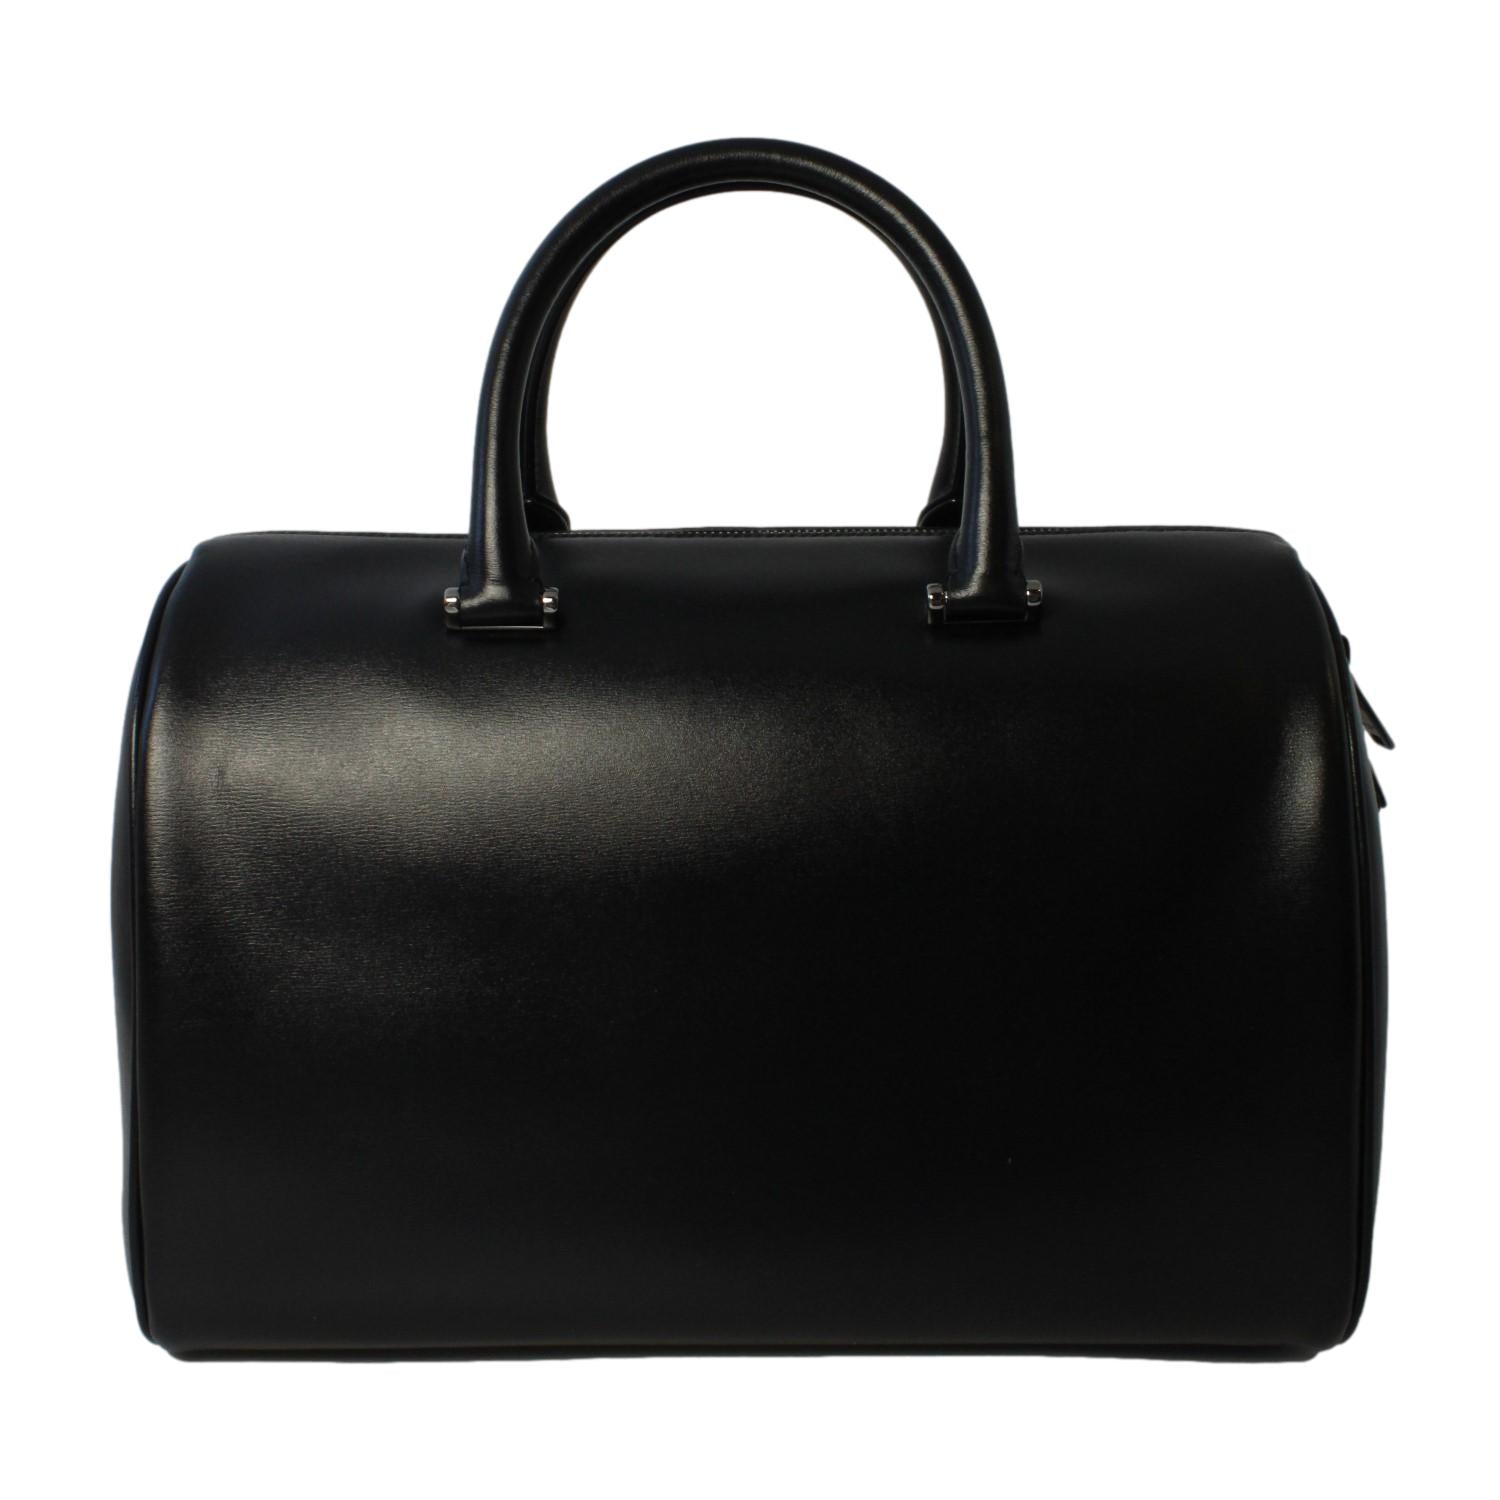 Saint Laurent 12 Hour Calfskin Leather Pony Hair Duffle Bag 533480 at_Queen_Bee_of_Beverly_Hills